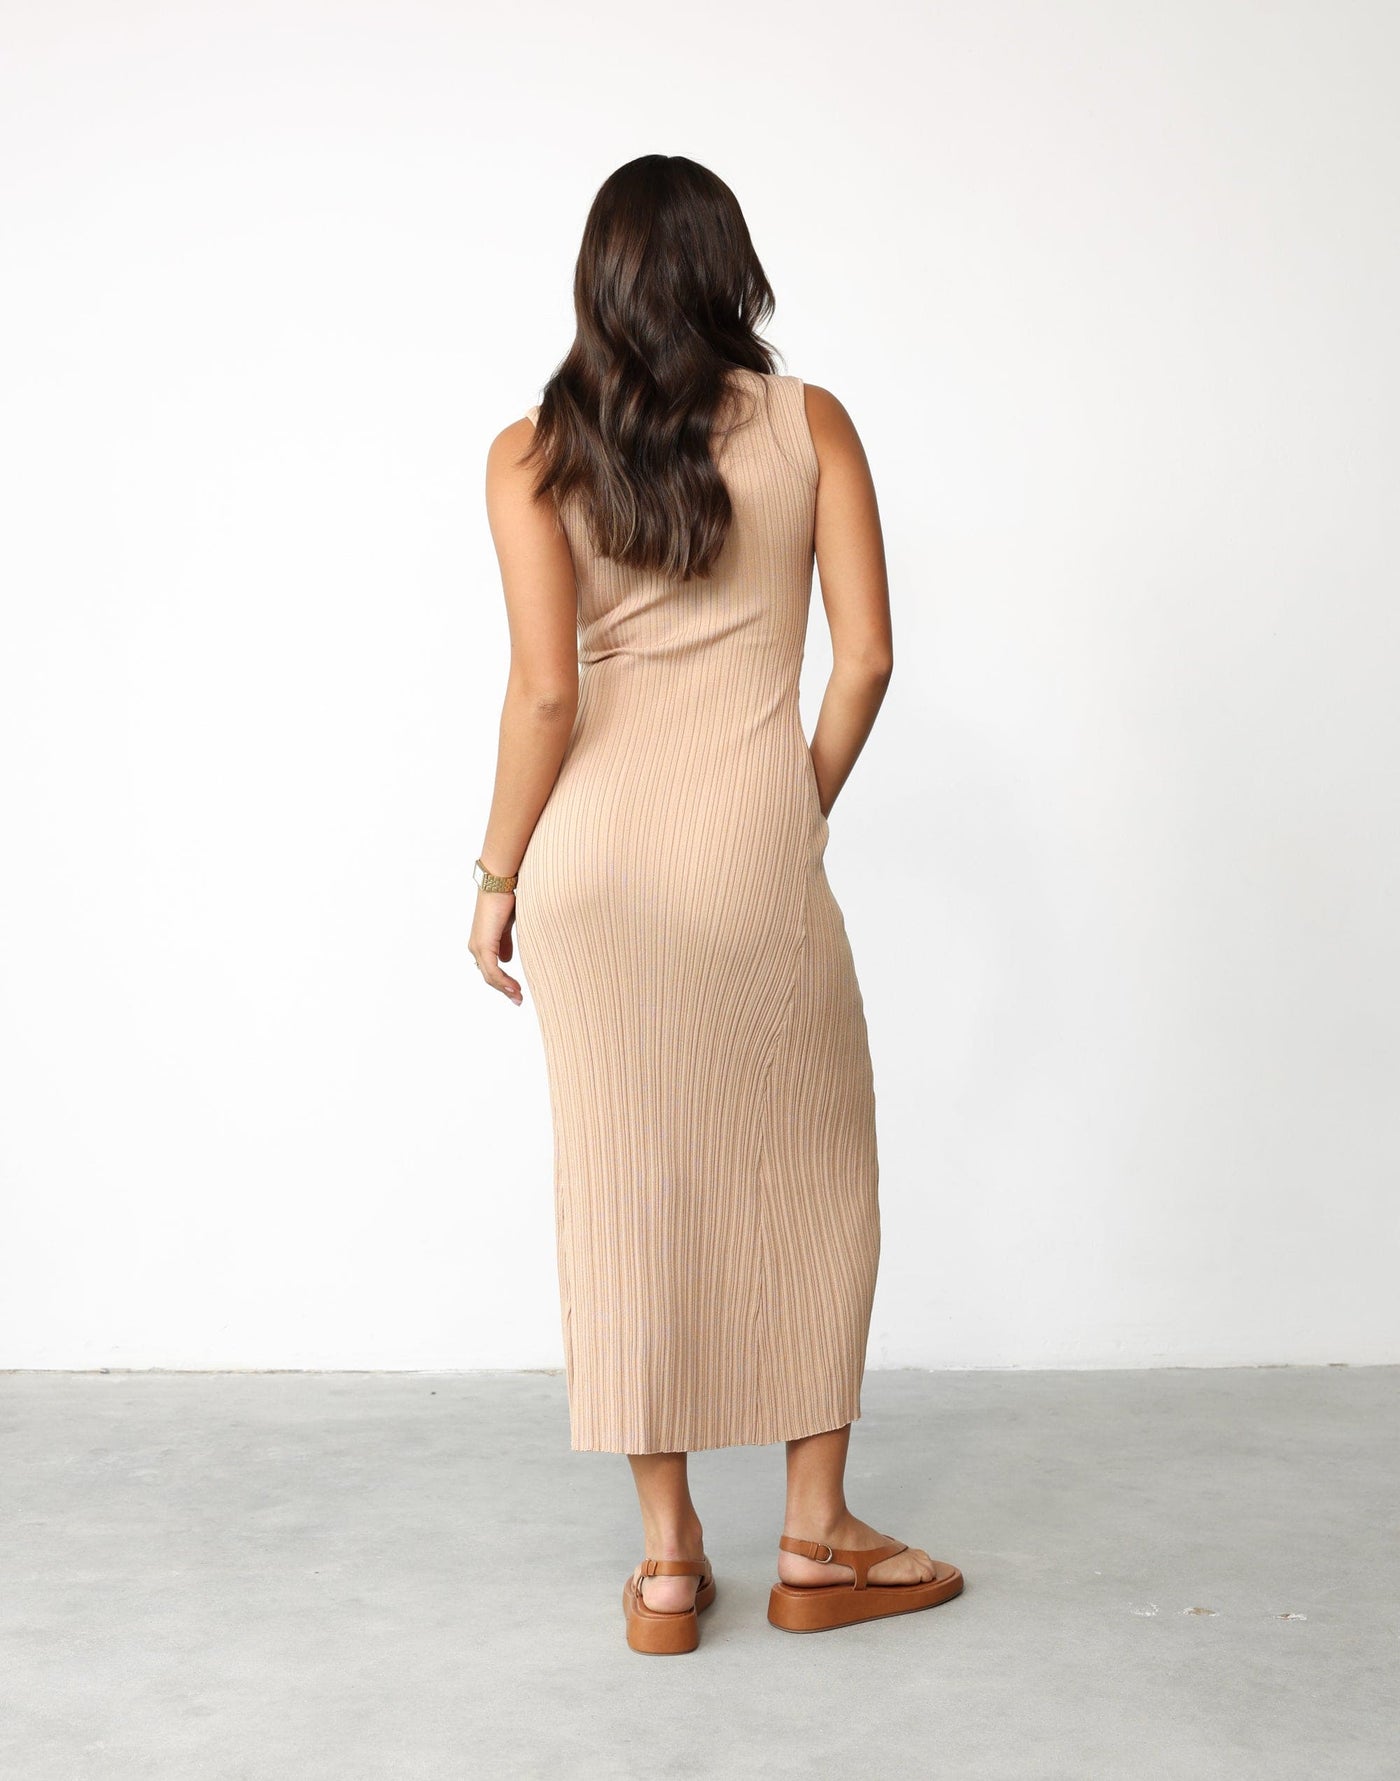 Melissa Maxi Dress (Latte) - High Boat Neck Ribbed Stretchy Bodycon Maxi Dress - Women's Dress - Charcoal Clothing